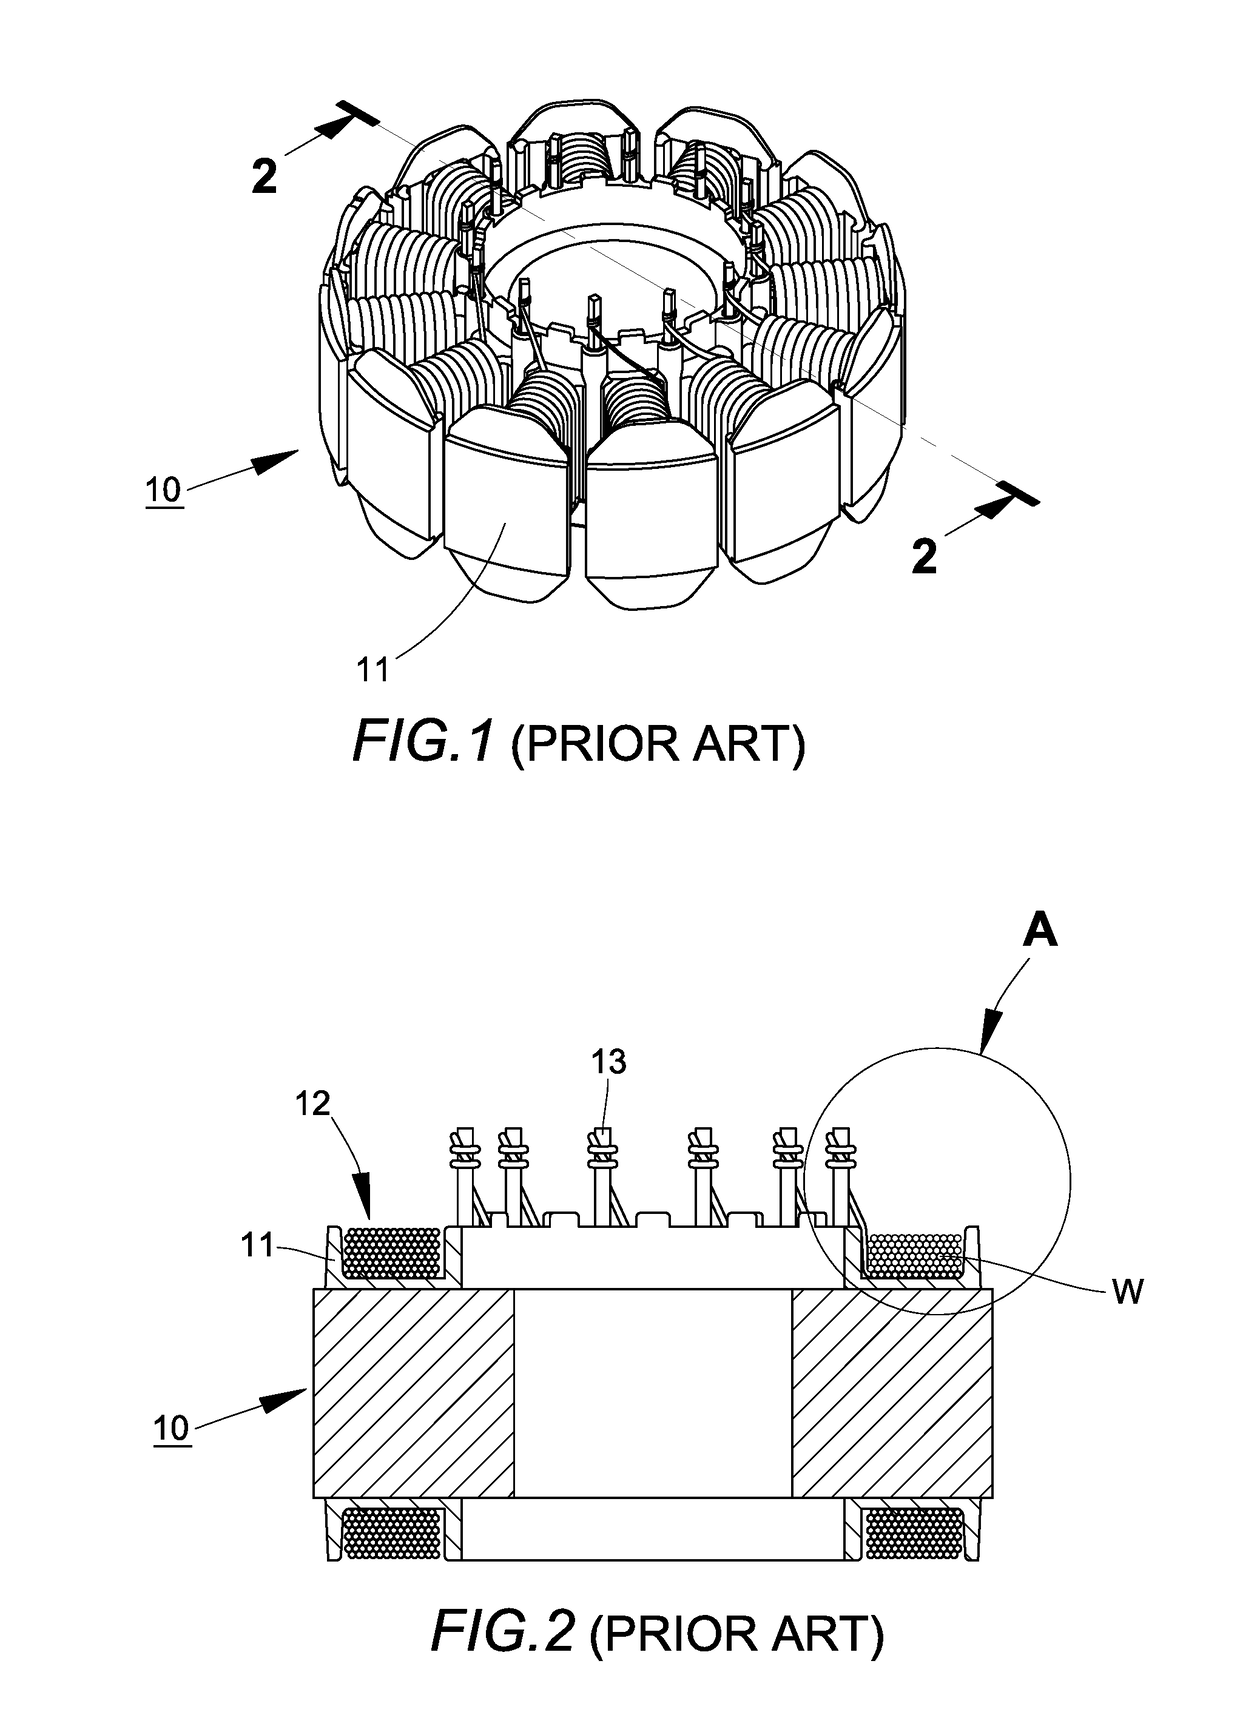 Method of winding a stator core to prevent breakage of wire between pin and winding groove